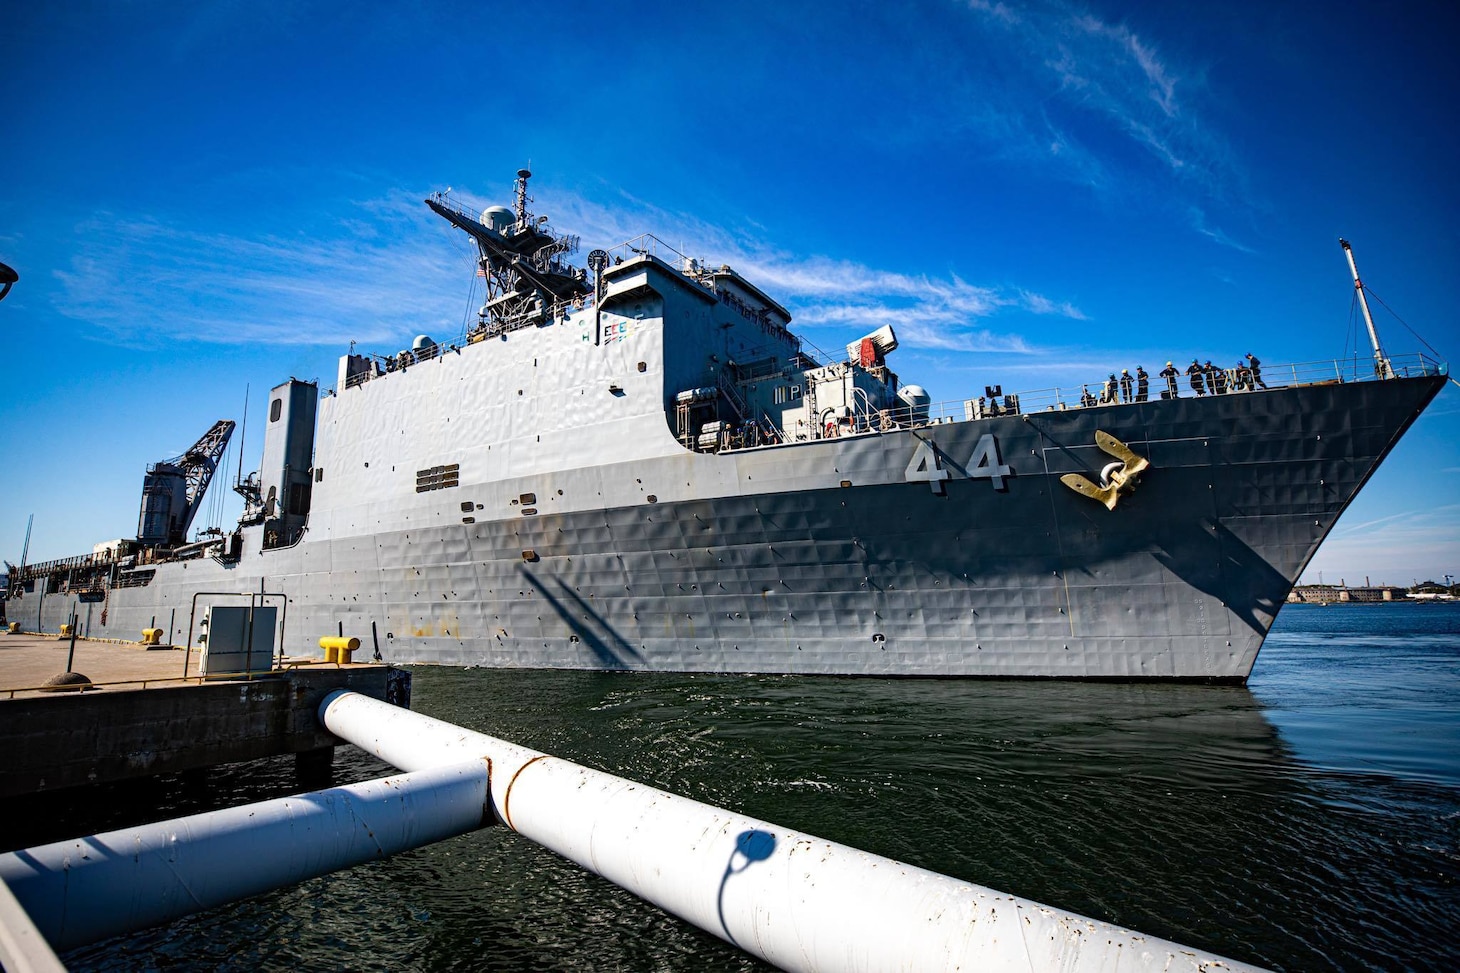 (August 5, 2022) The Whidbey Island-class dock landing ship USS Gunston Hall (LSD 44) enters port in Tallinn, Estonia for a scheduled port visit, August 5, 2022. USS Gunston Hall, assigned to the Kearsarge Amphibious Ready Group, under the command and control of Task Force 61/2, is on a scheduled deployment in the U.S. Naval Forces Europe area of operations, employed by U.S. Sixth Fleet to defend U.S., allied and partner interests. (Photo courtesy of Estonian Navy Lt. j.g. Aleksander Espenburg)